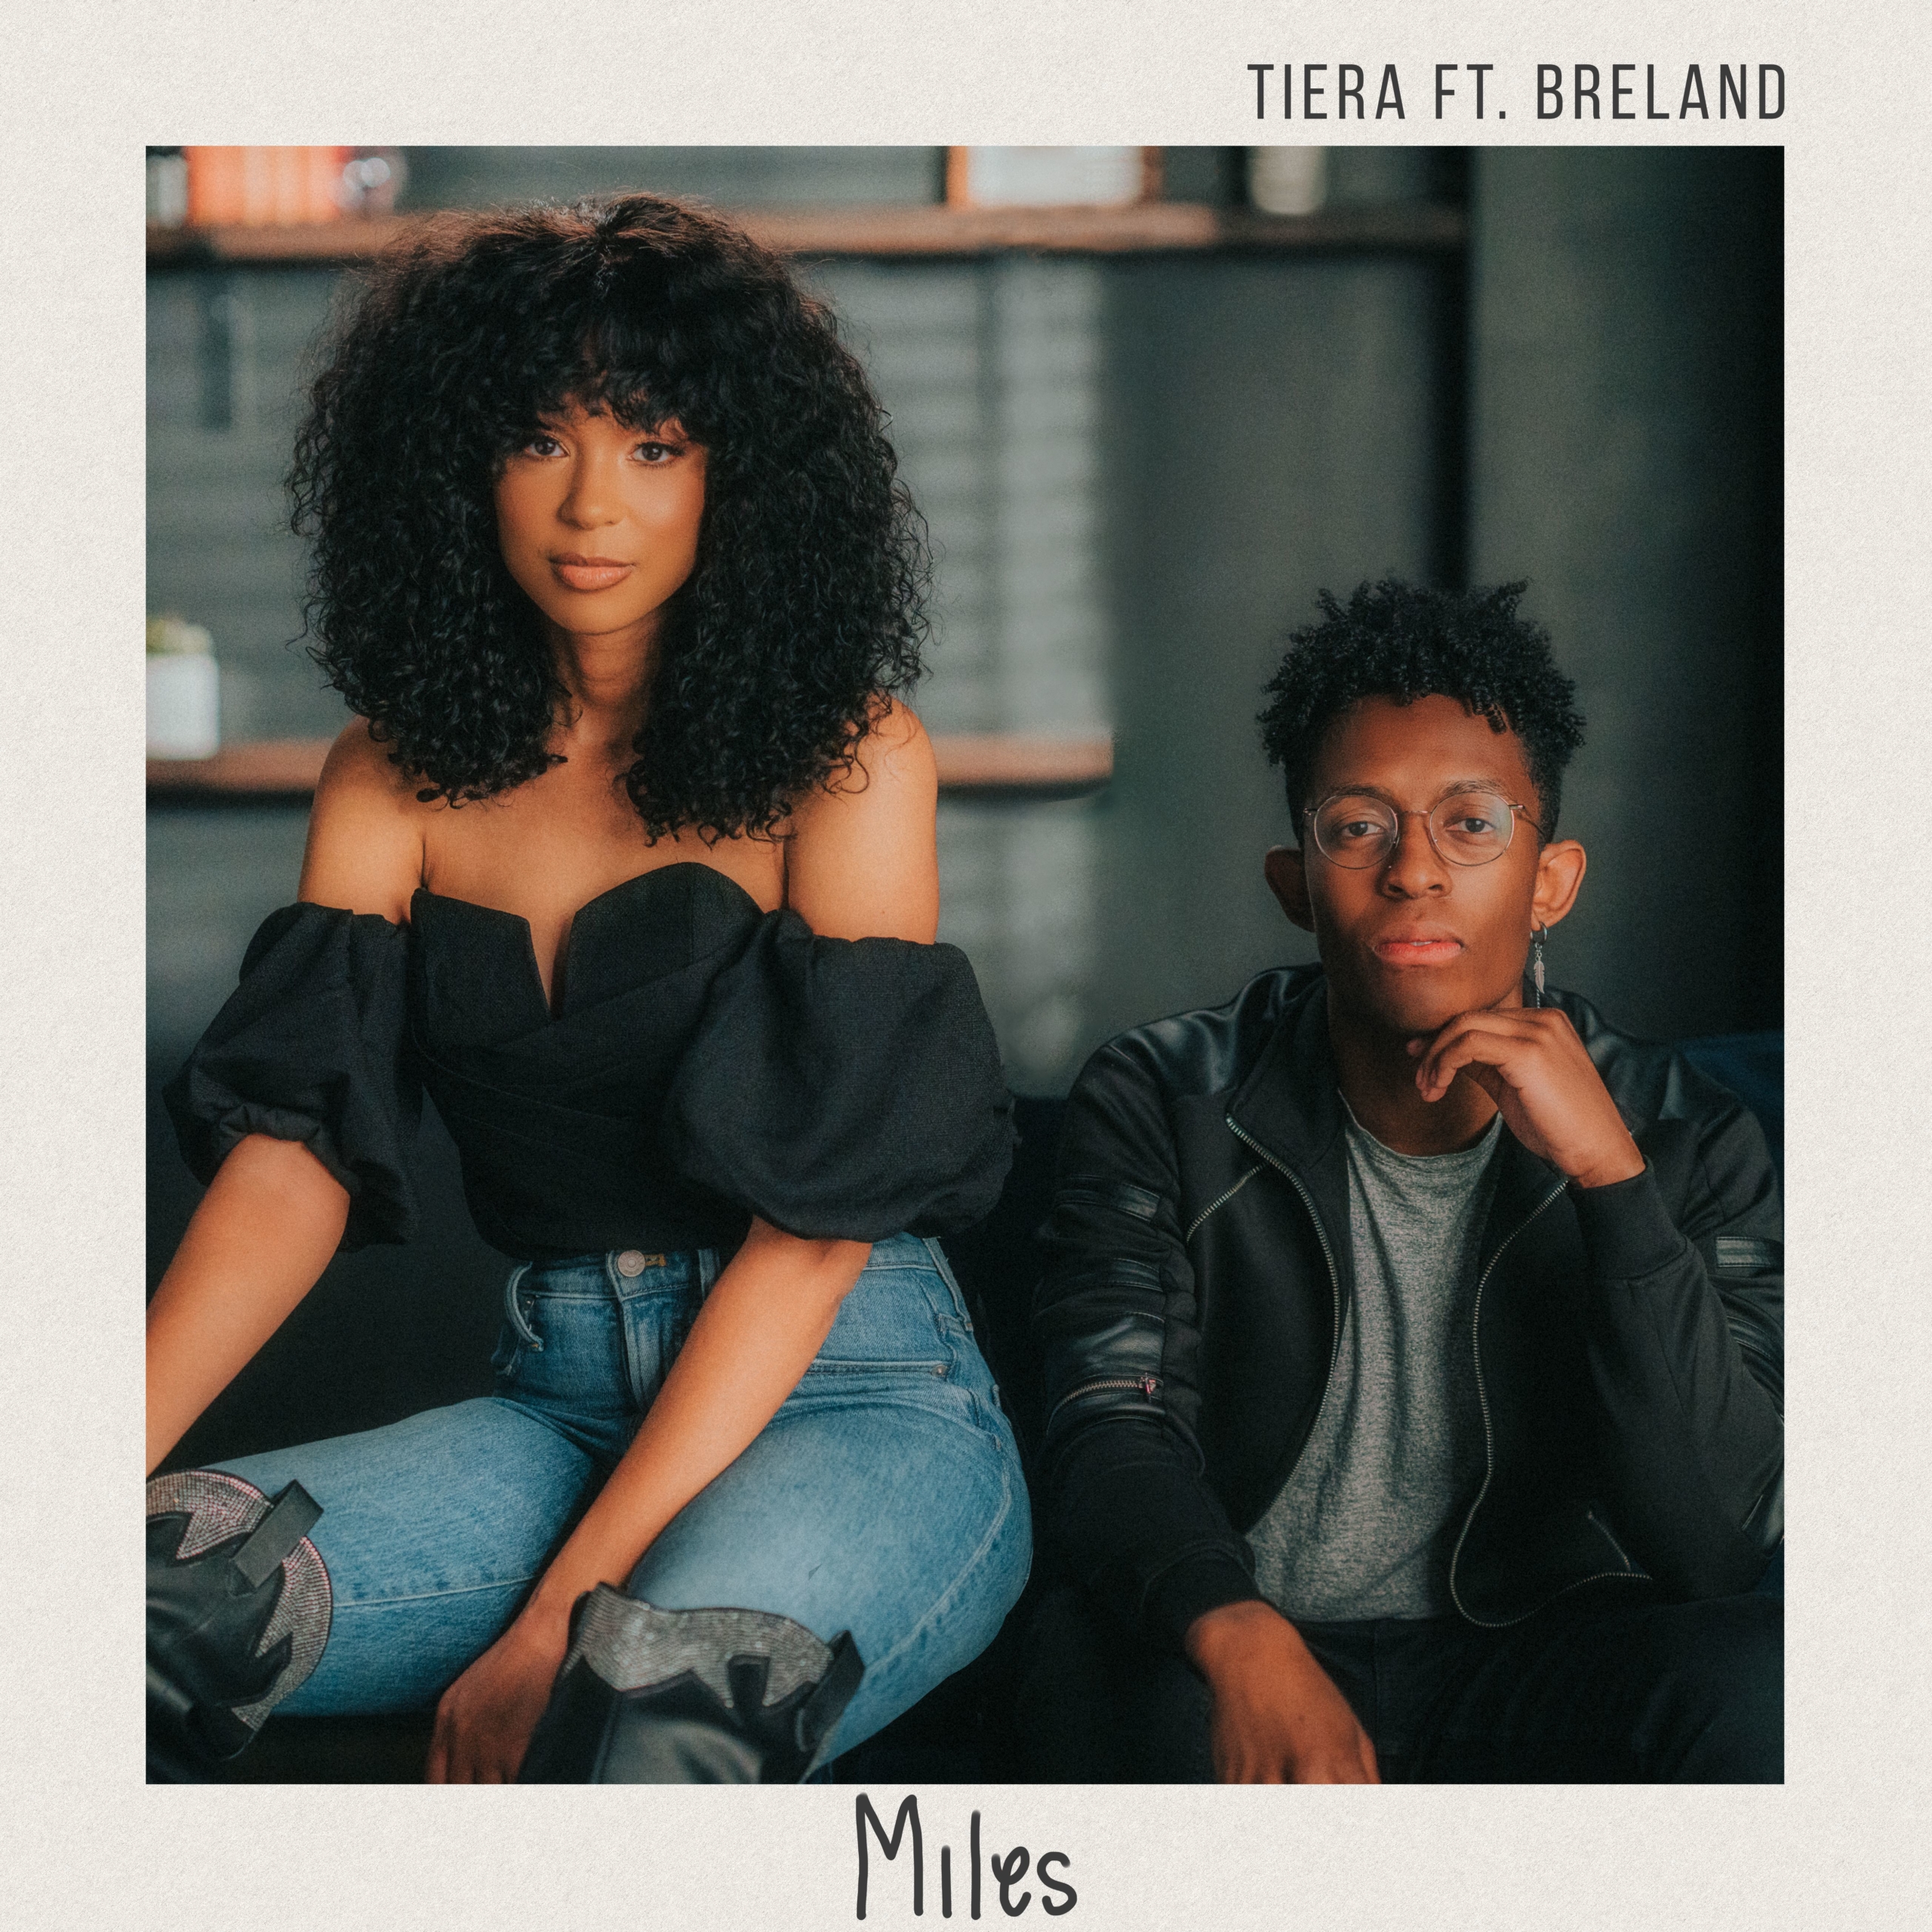 Tiera’s new song "Miles" featuring Breland is available everywhere now, February 12th